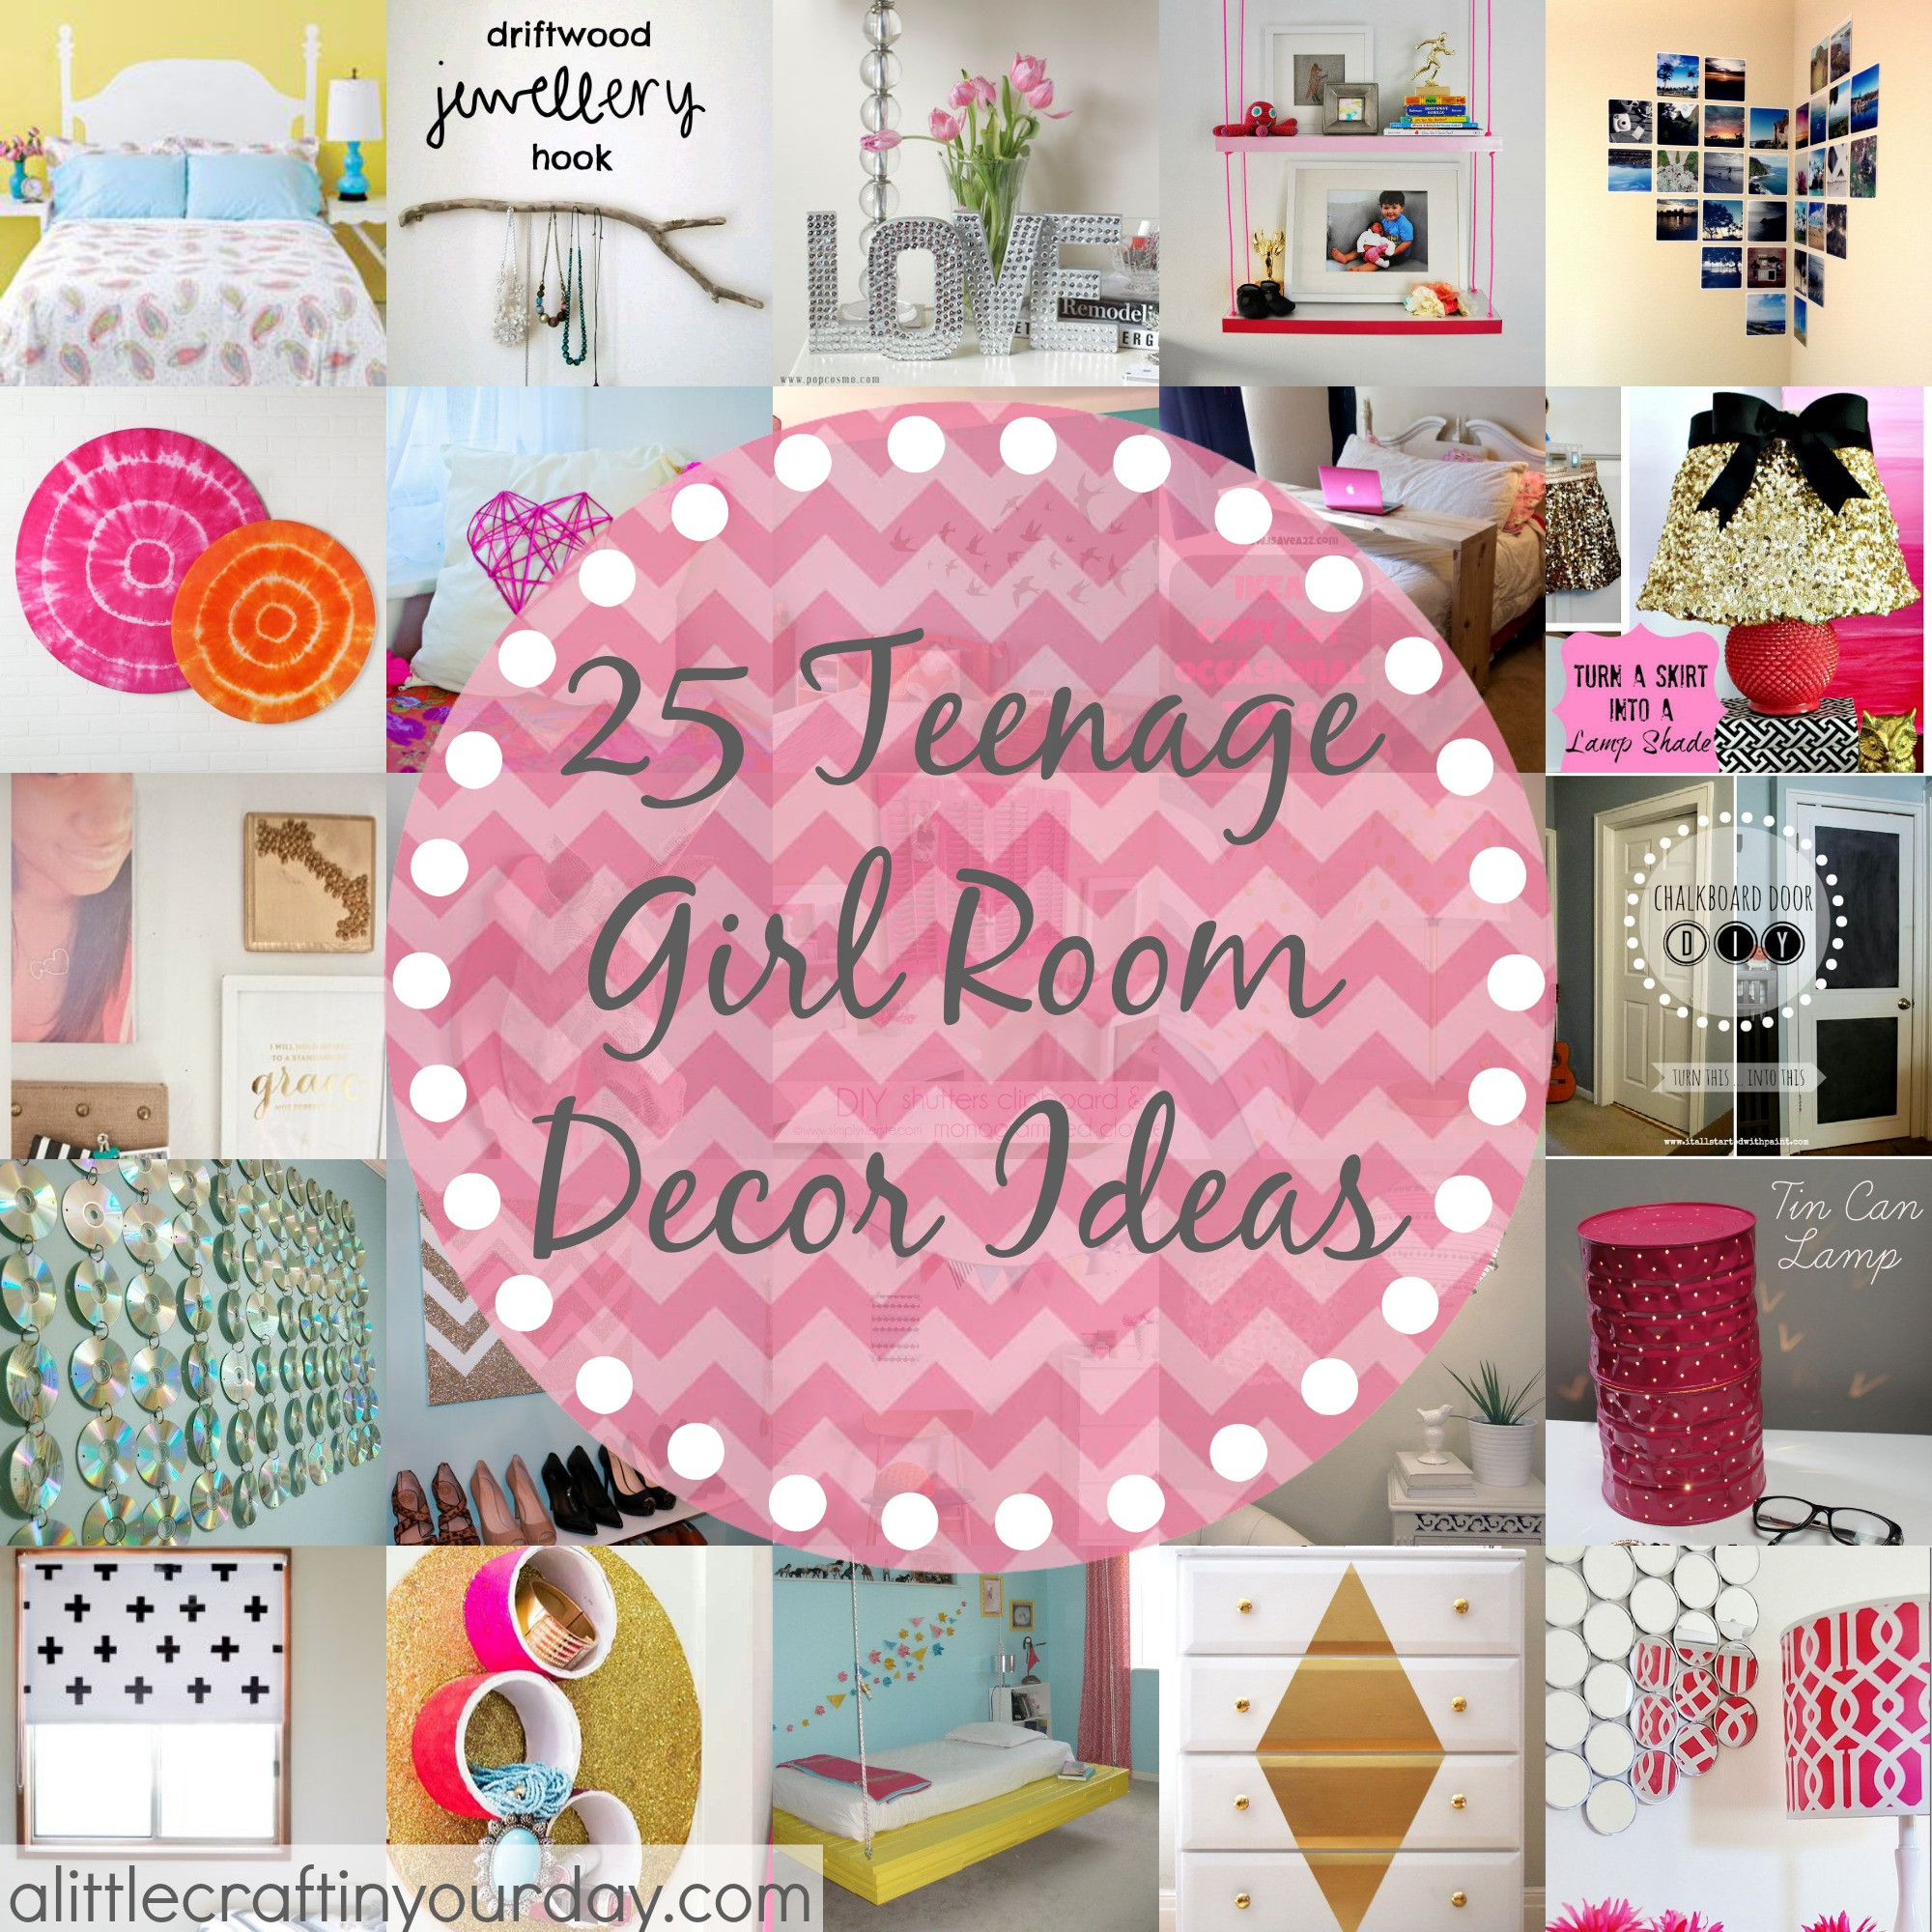 DIY Decor For Girls Room
 25 More Teenage Girl Room Decor Ideas A Little Craft In